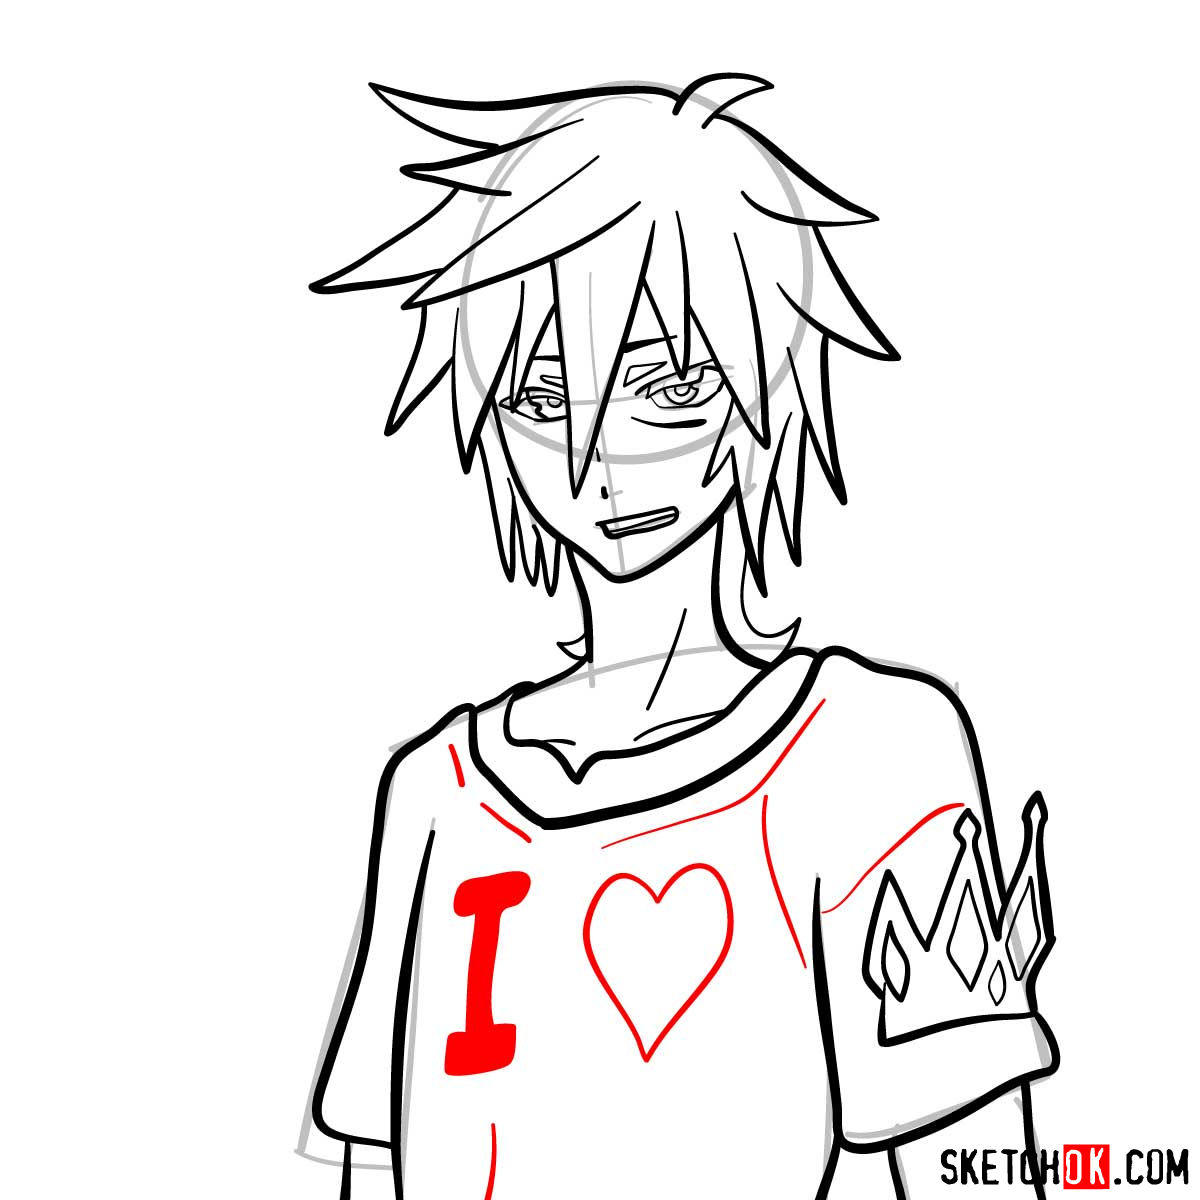 How to draw Sora from No Game No Life anime - step 09